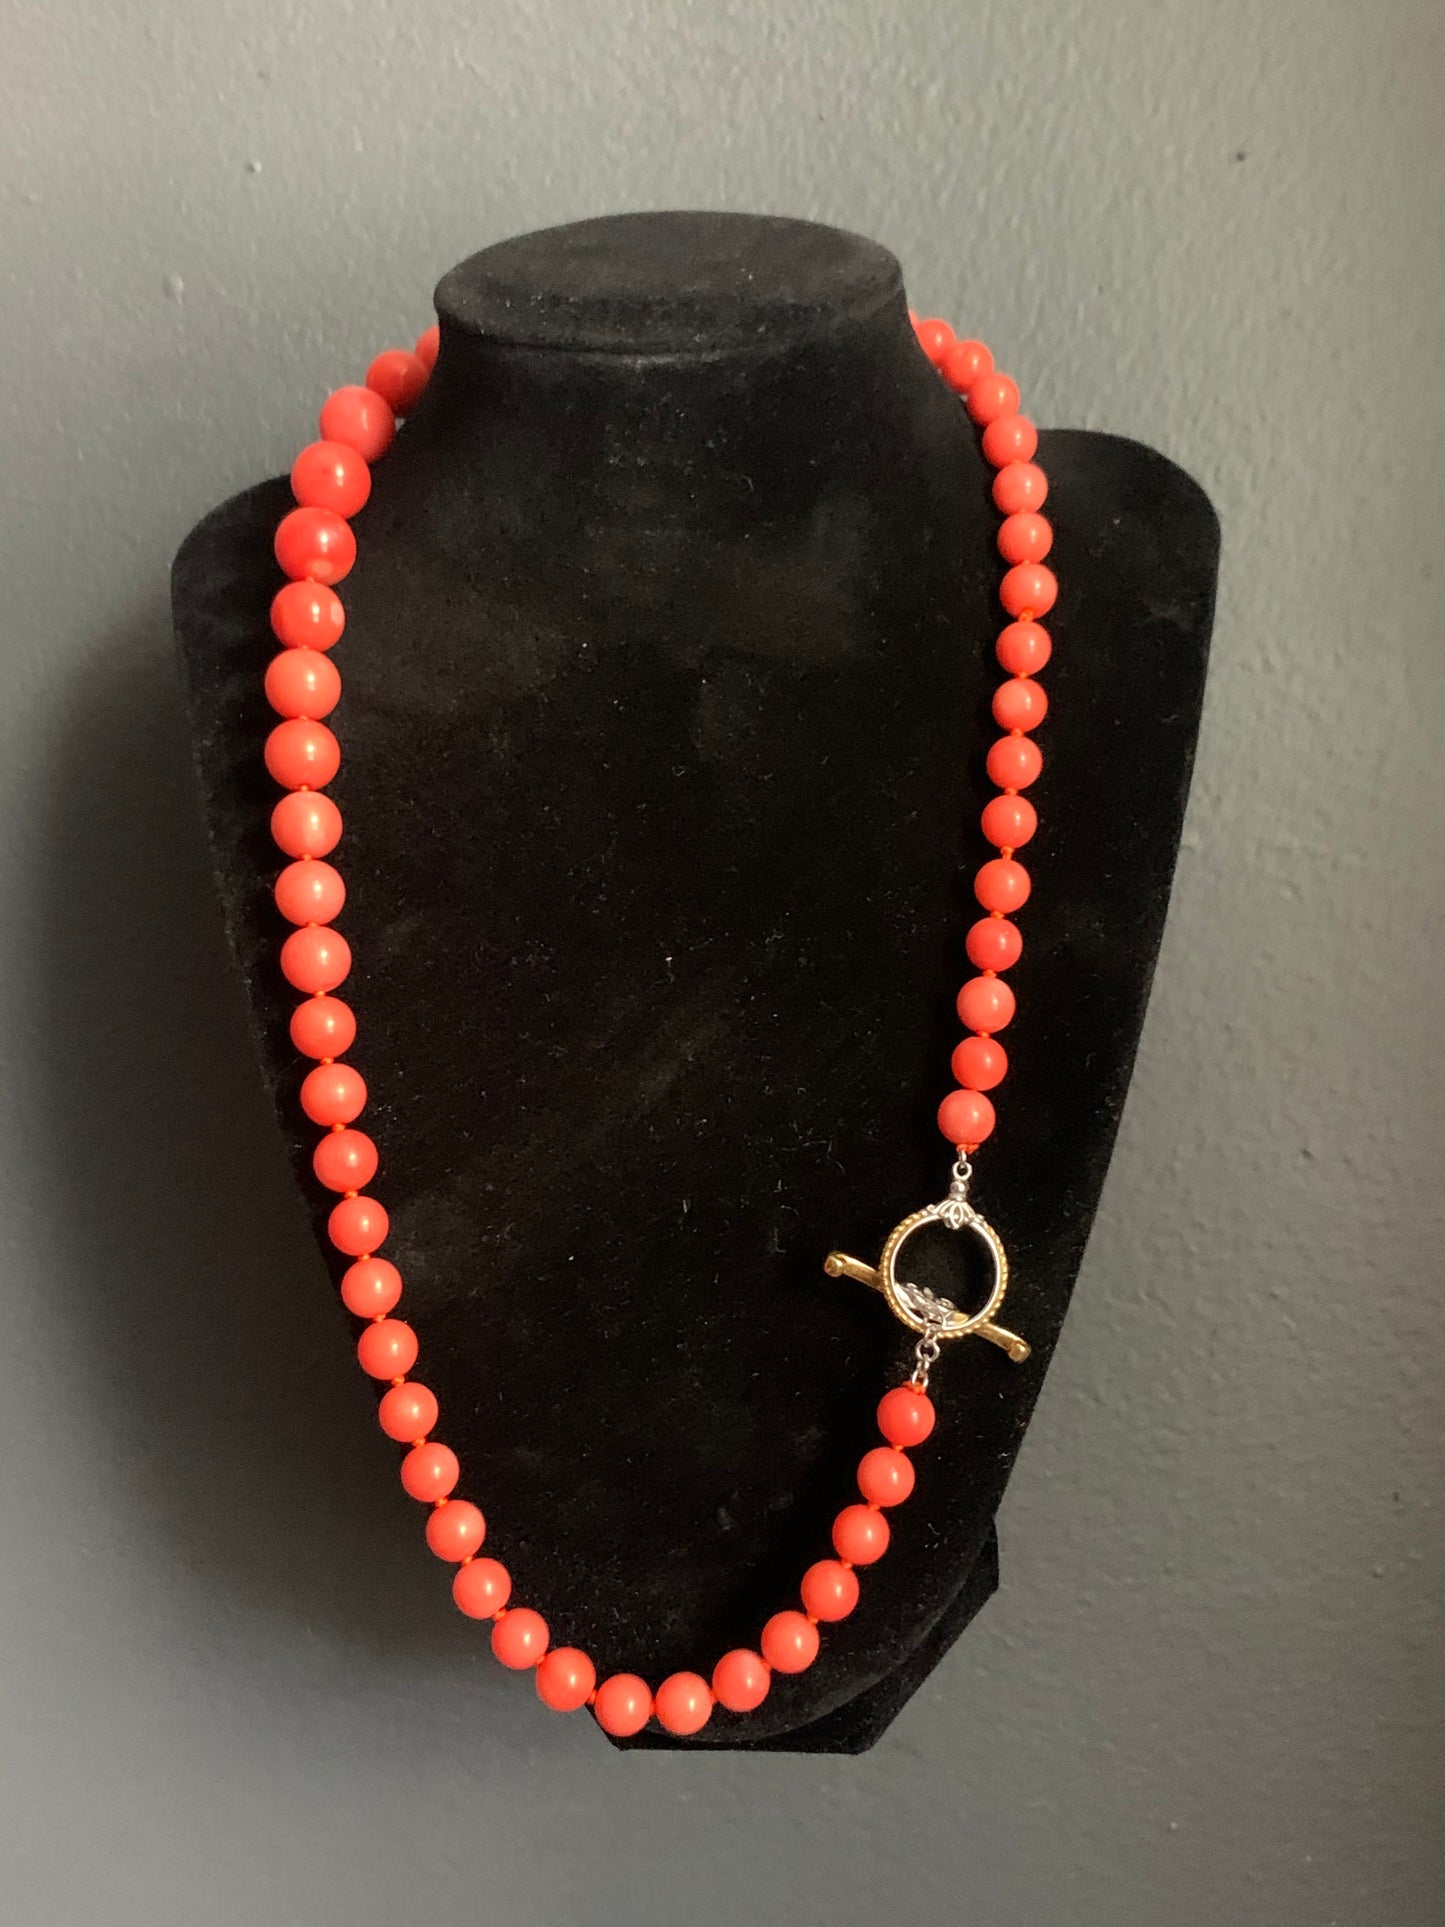 A coral like bead necklace